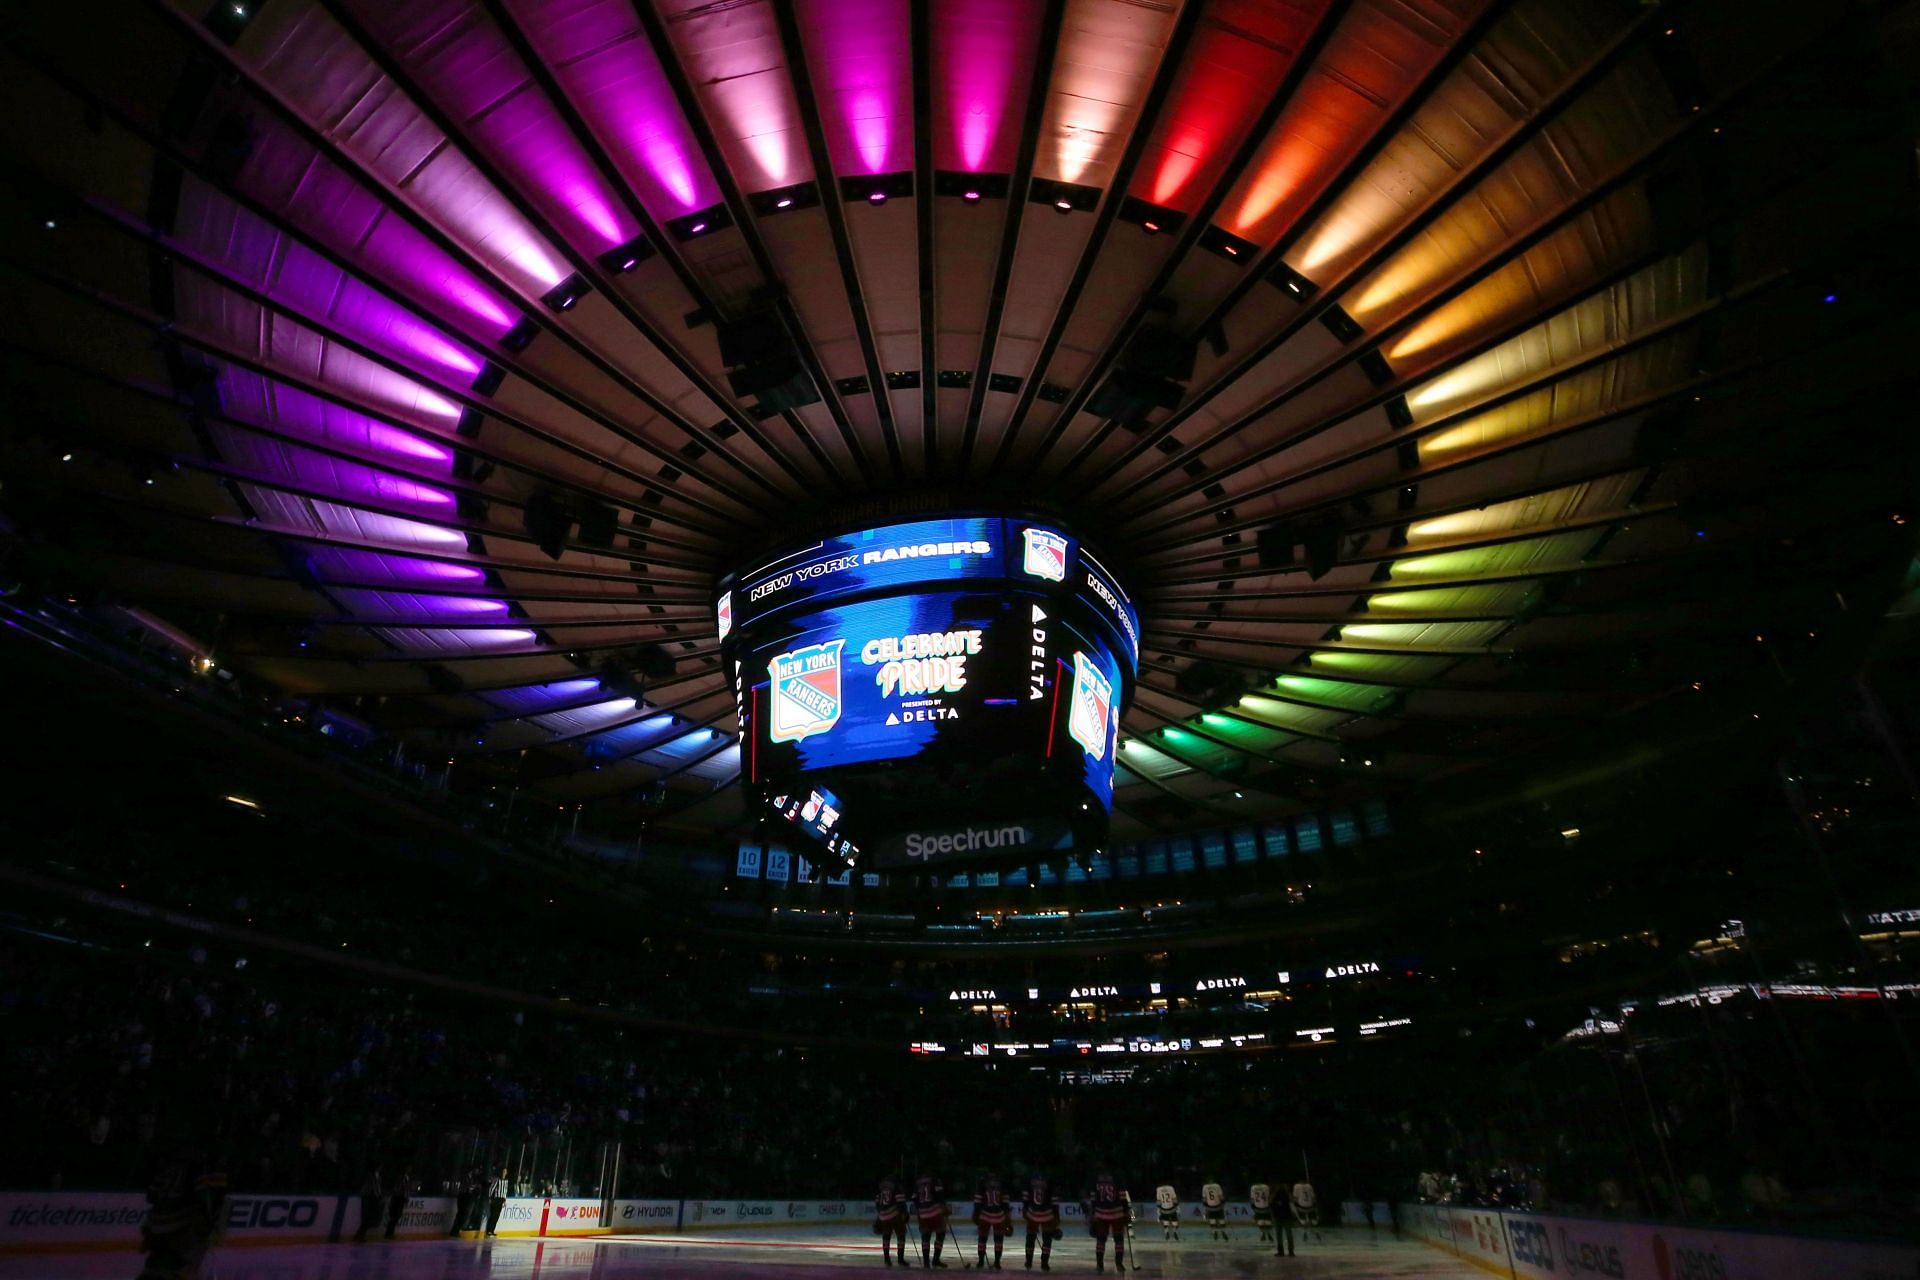 Controversy is surrounding NHL team Pride night events. What's